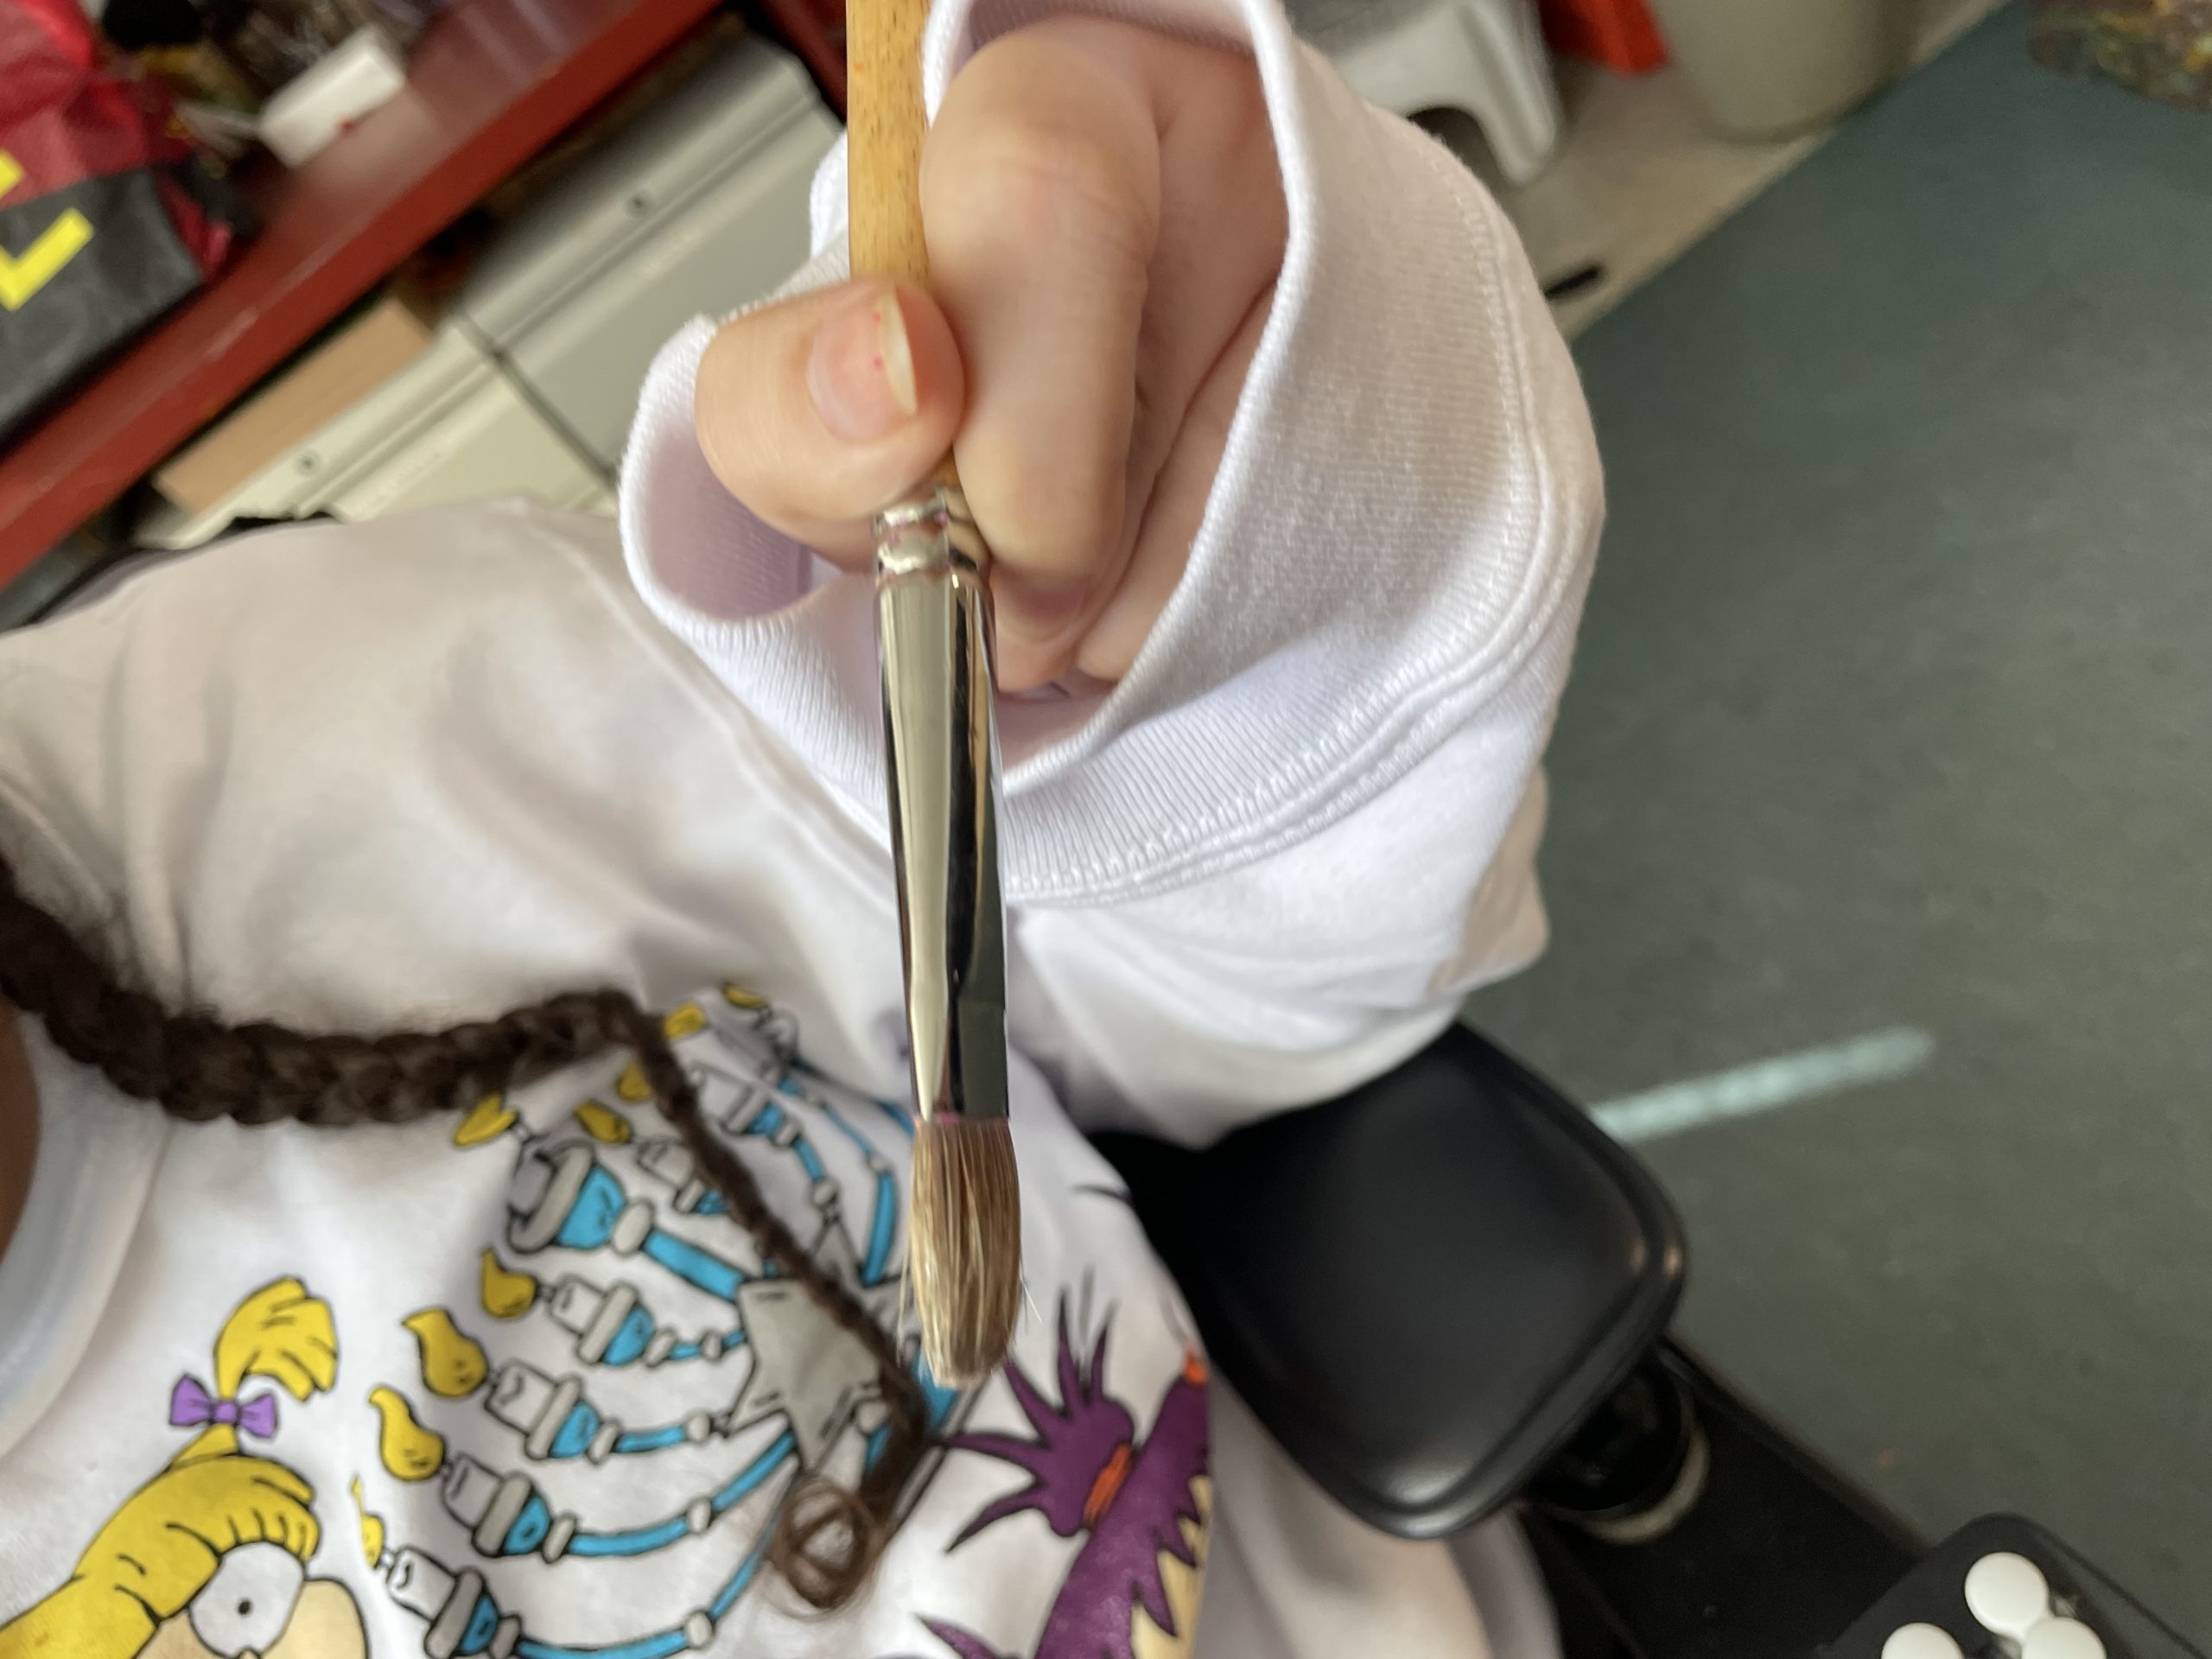 Shaude holding a paintbrush to show grip strength and positioning  